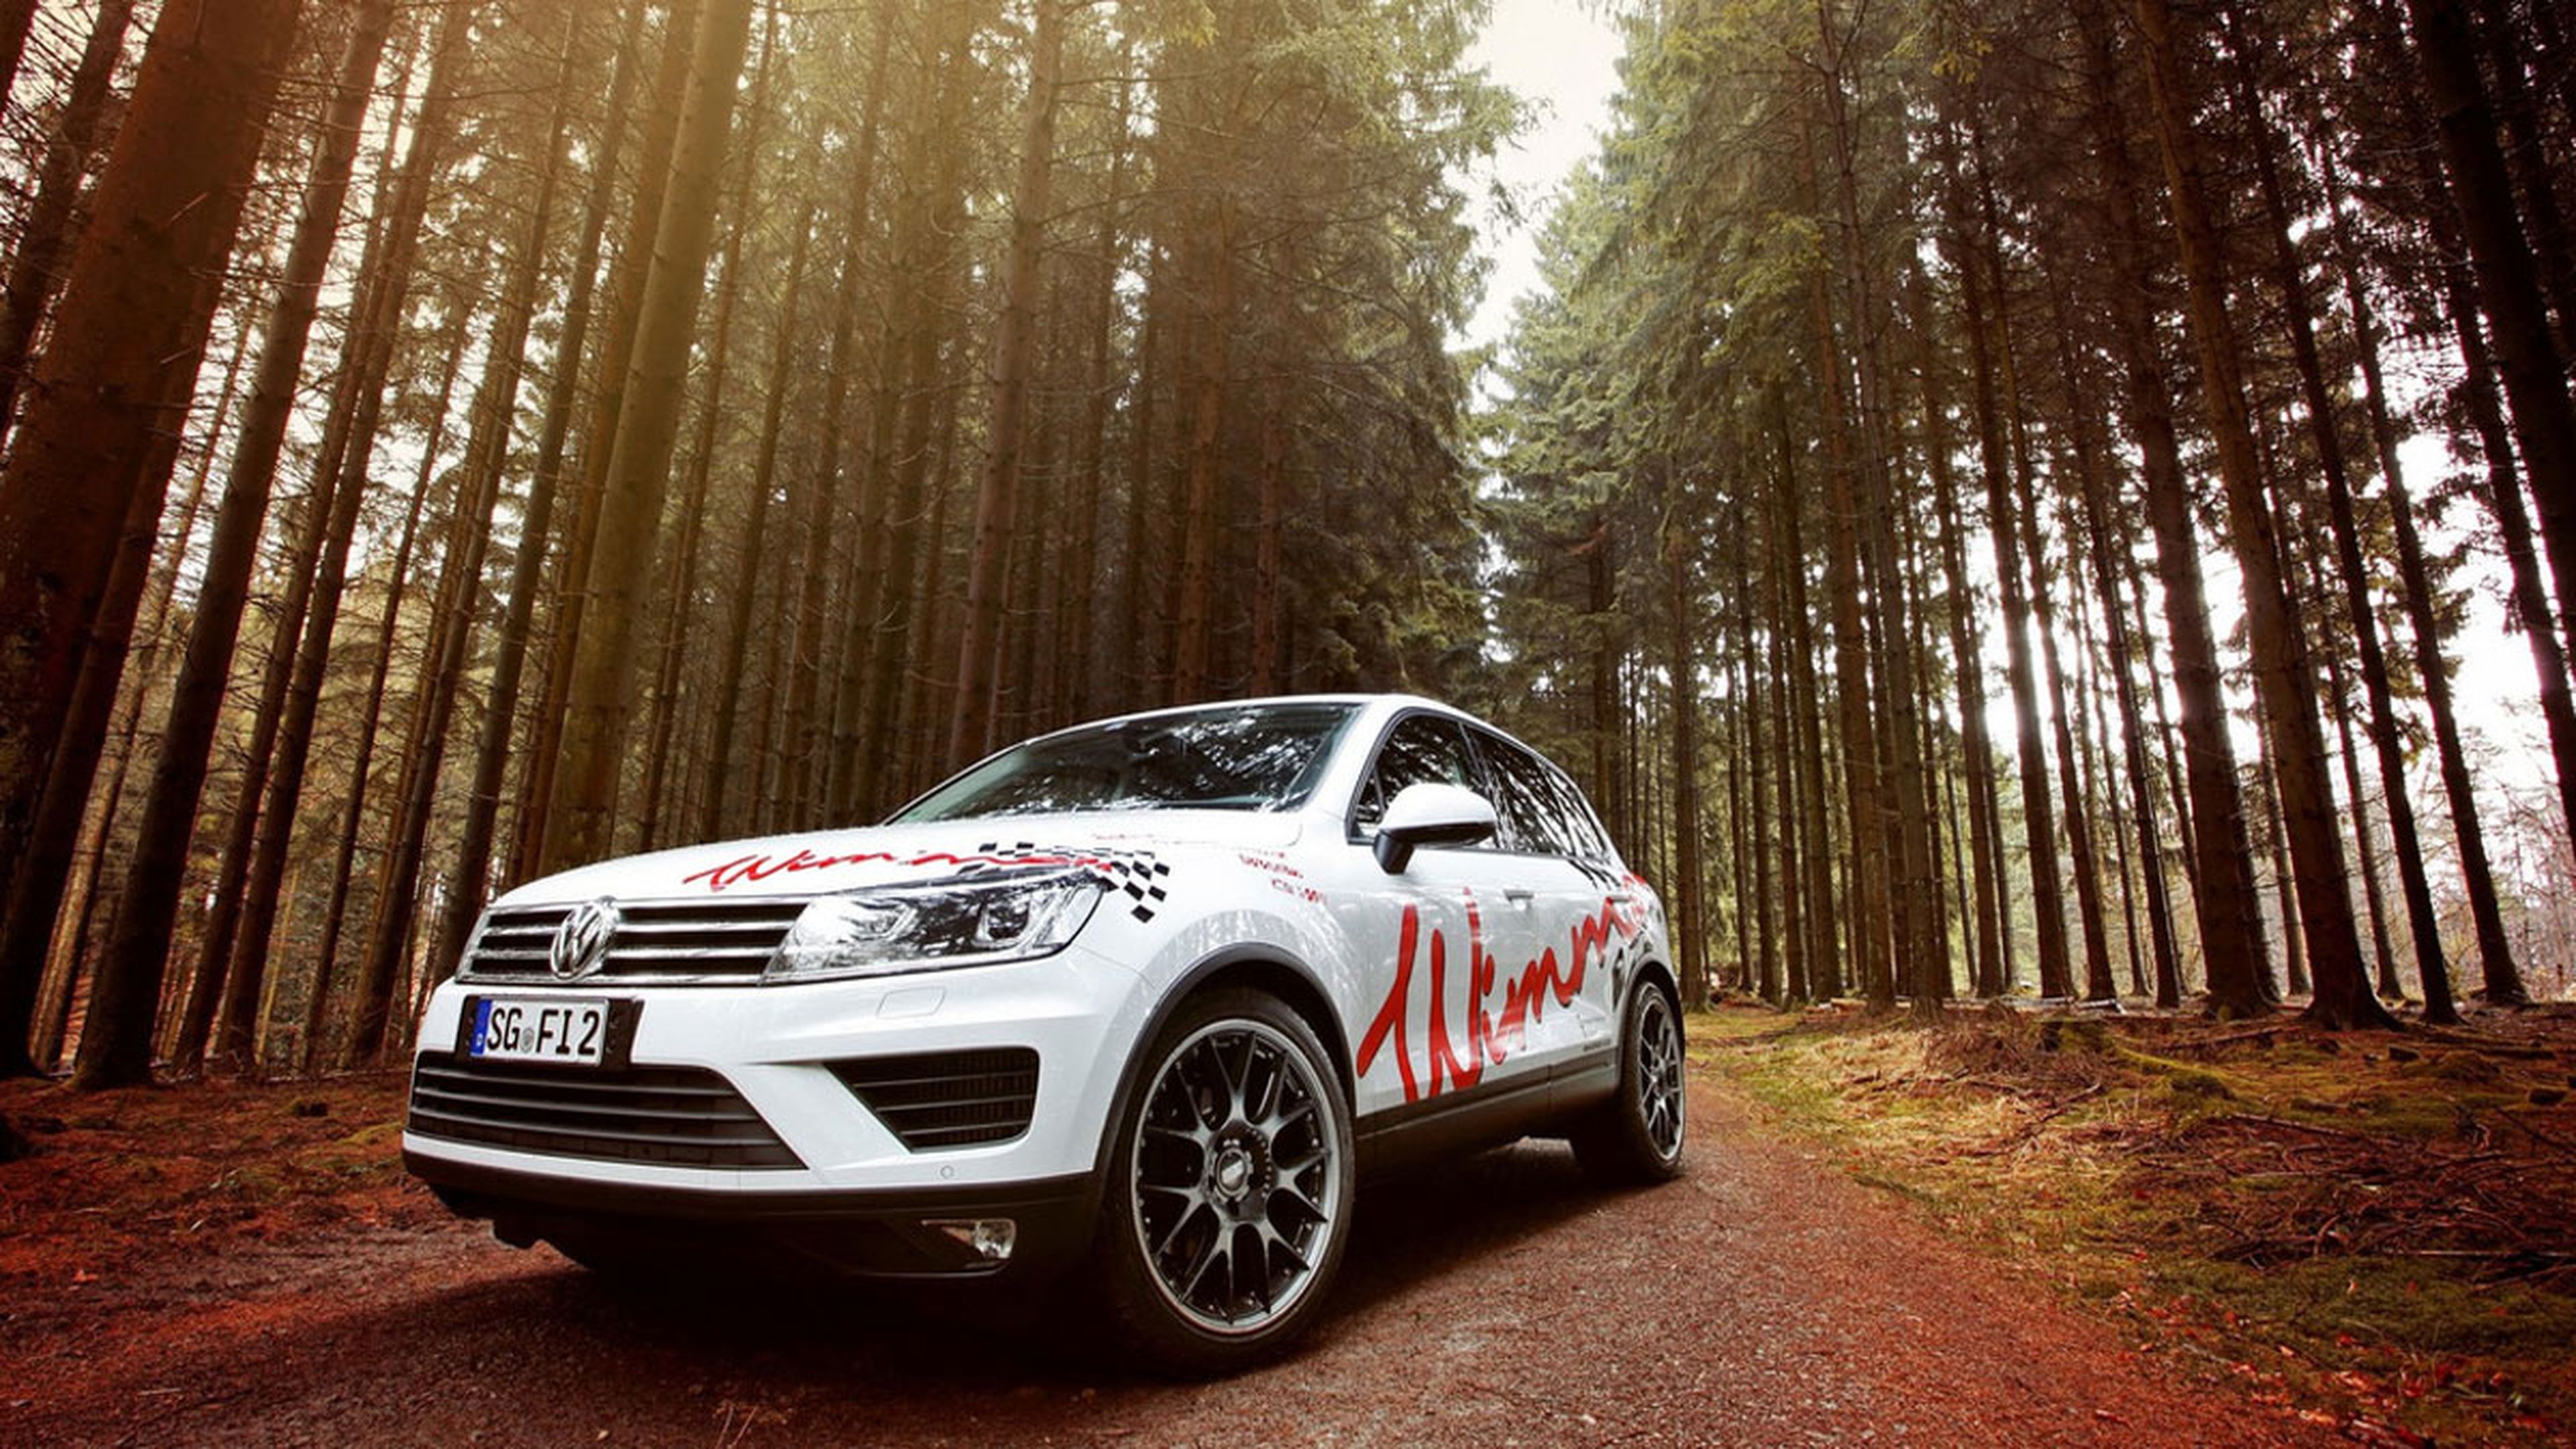 VW Touareg by Wimmer